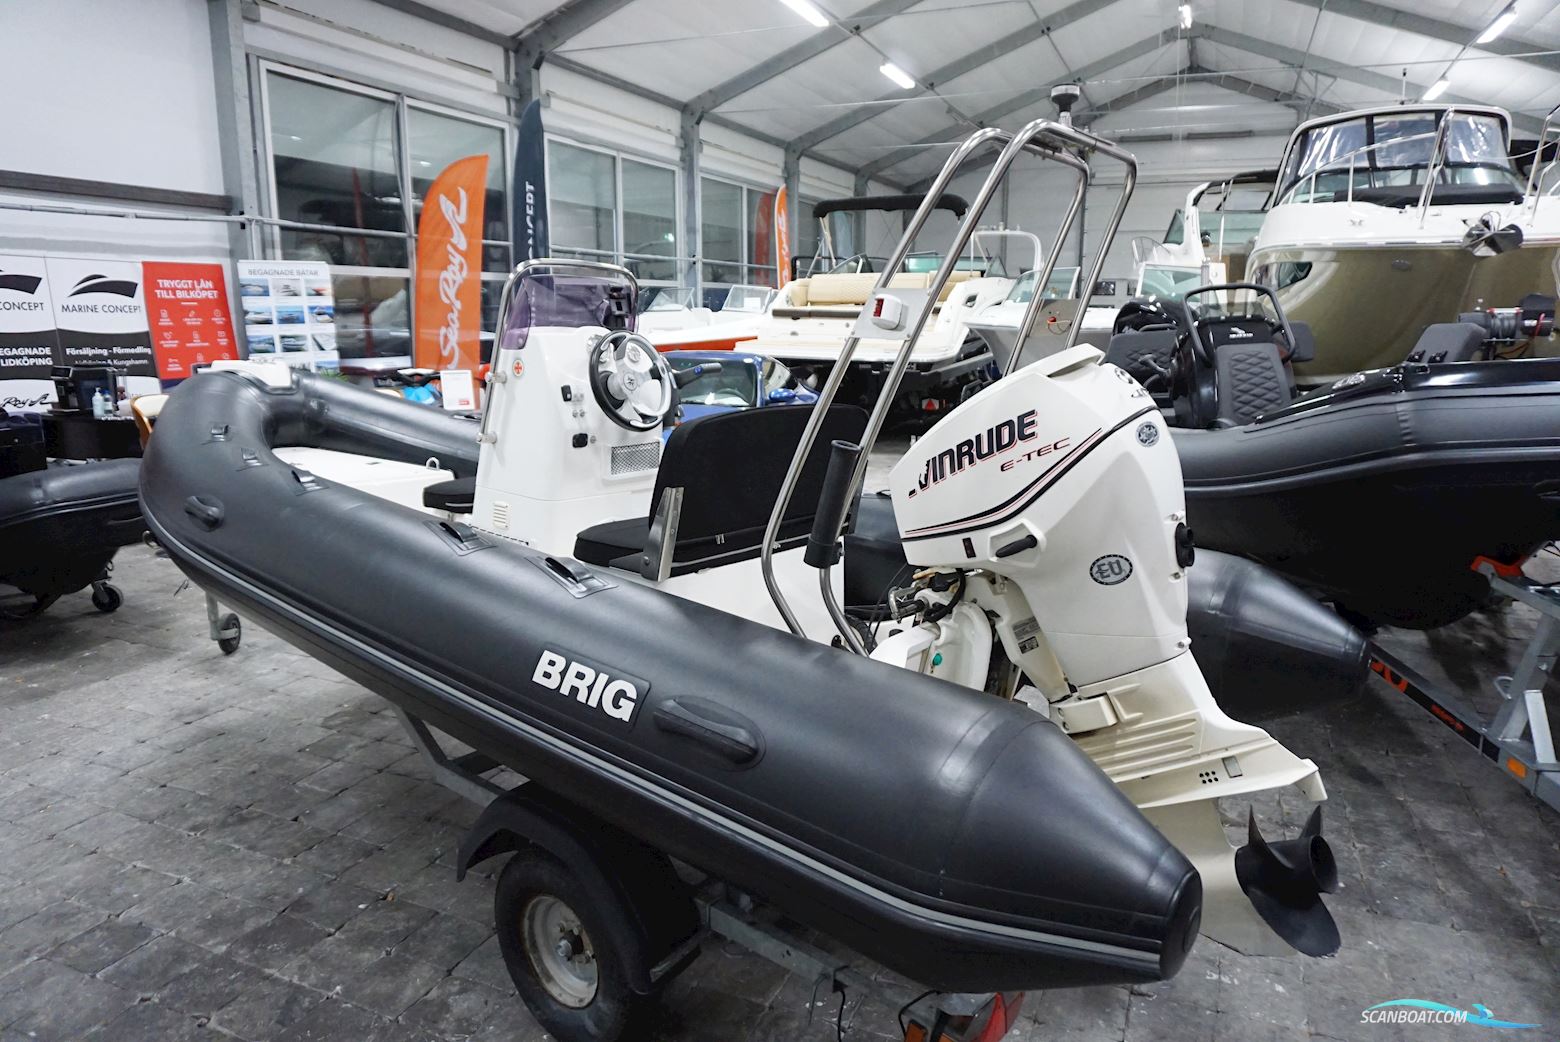 Brig Falcon 500 Inflatable / Rib 2011, with Evinrude 40hk engine, Sweden